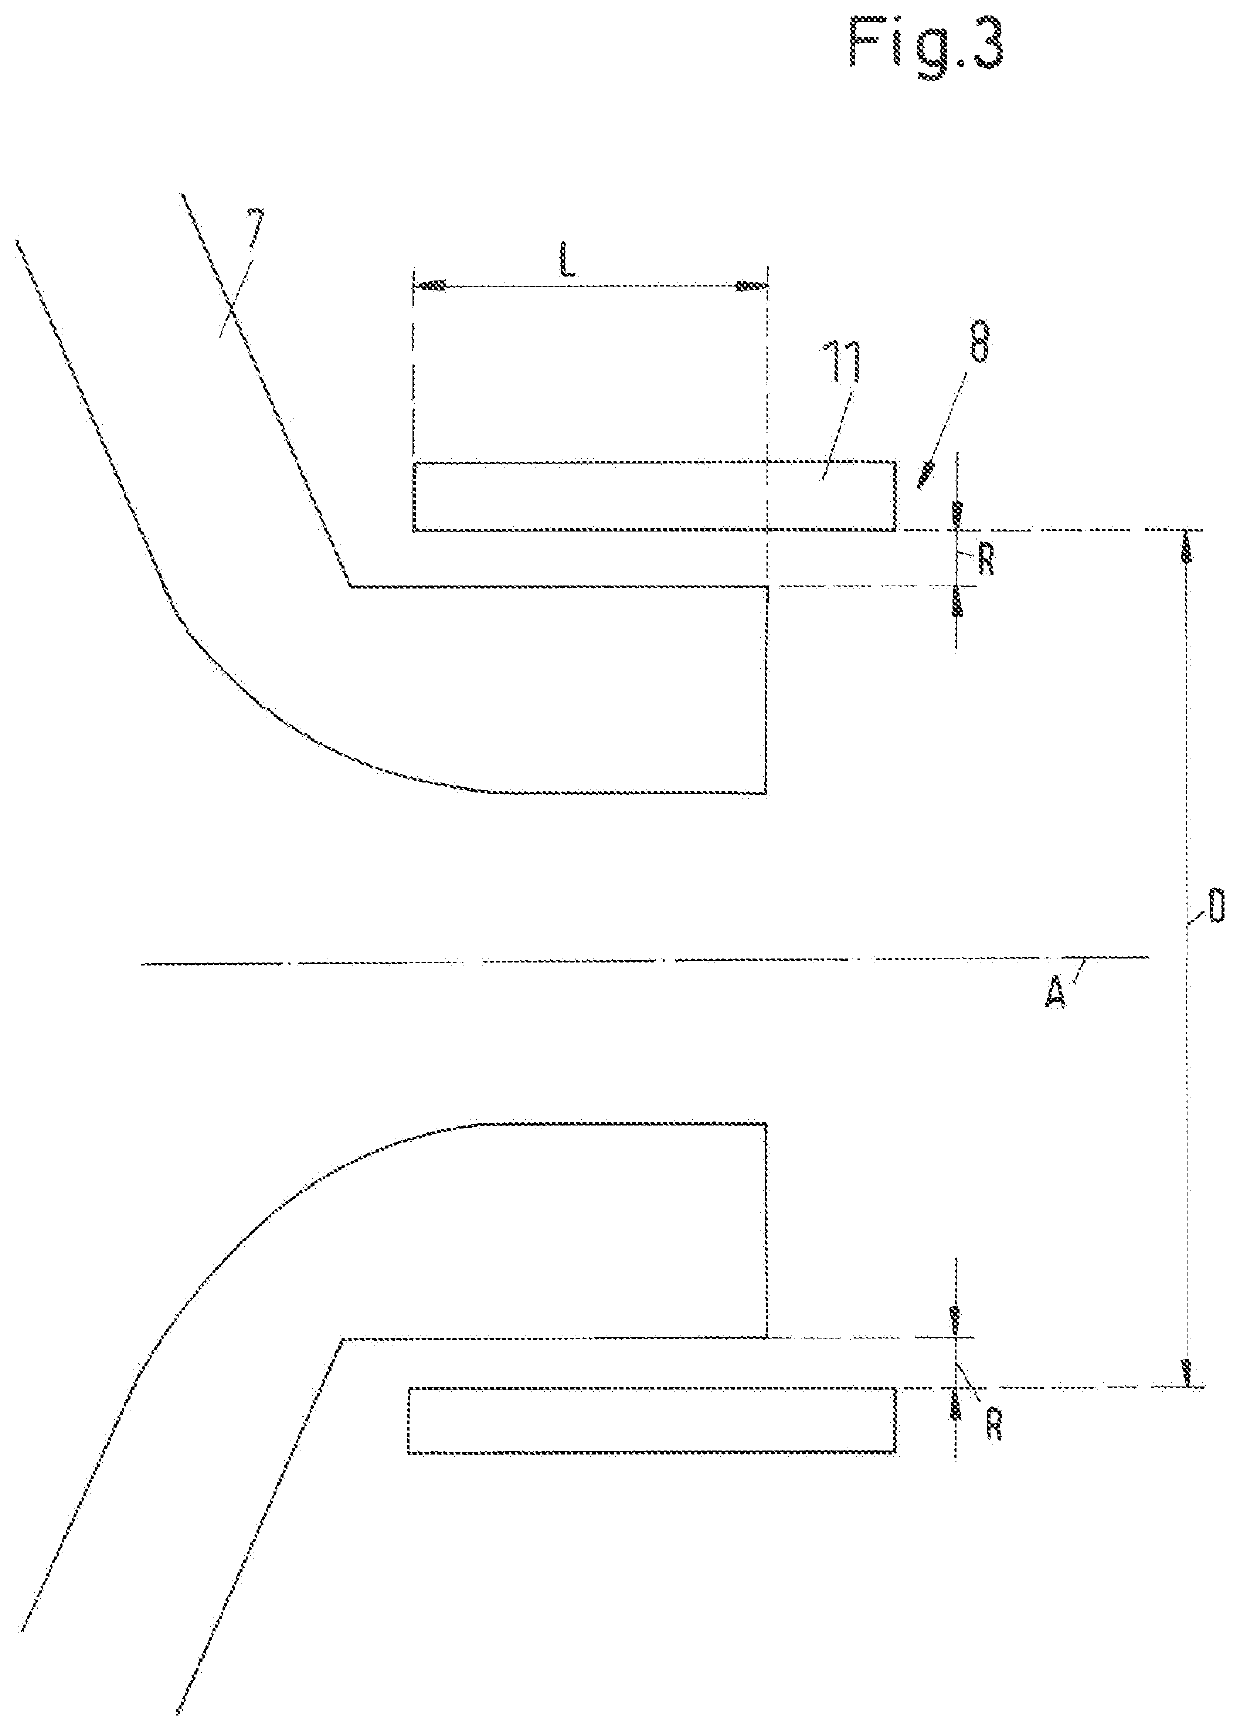 Pump for conveying a highly viscous fluid